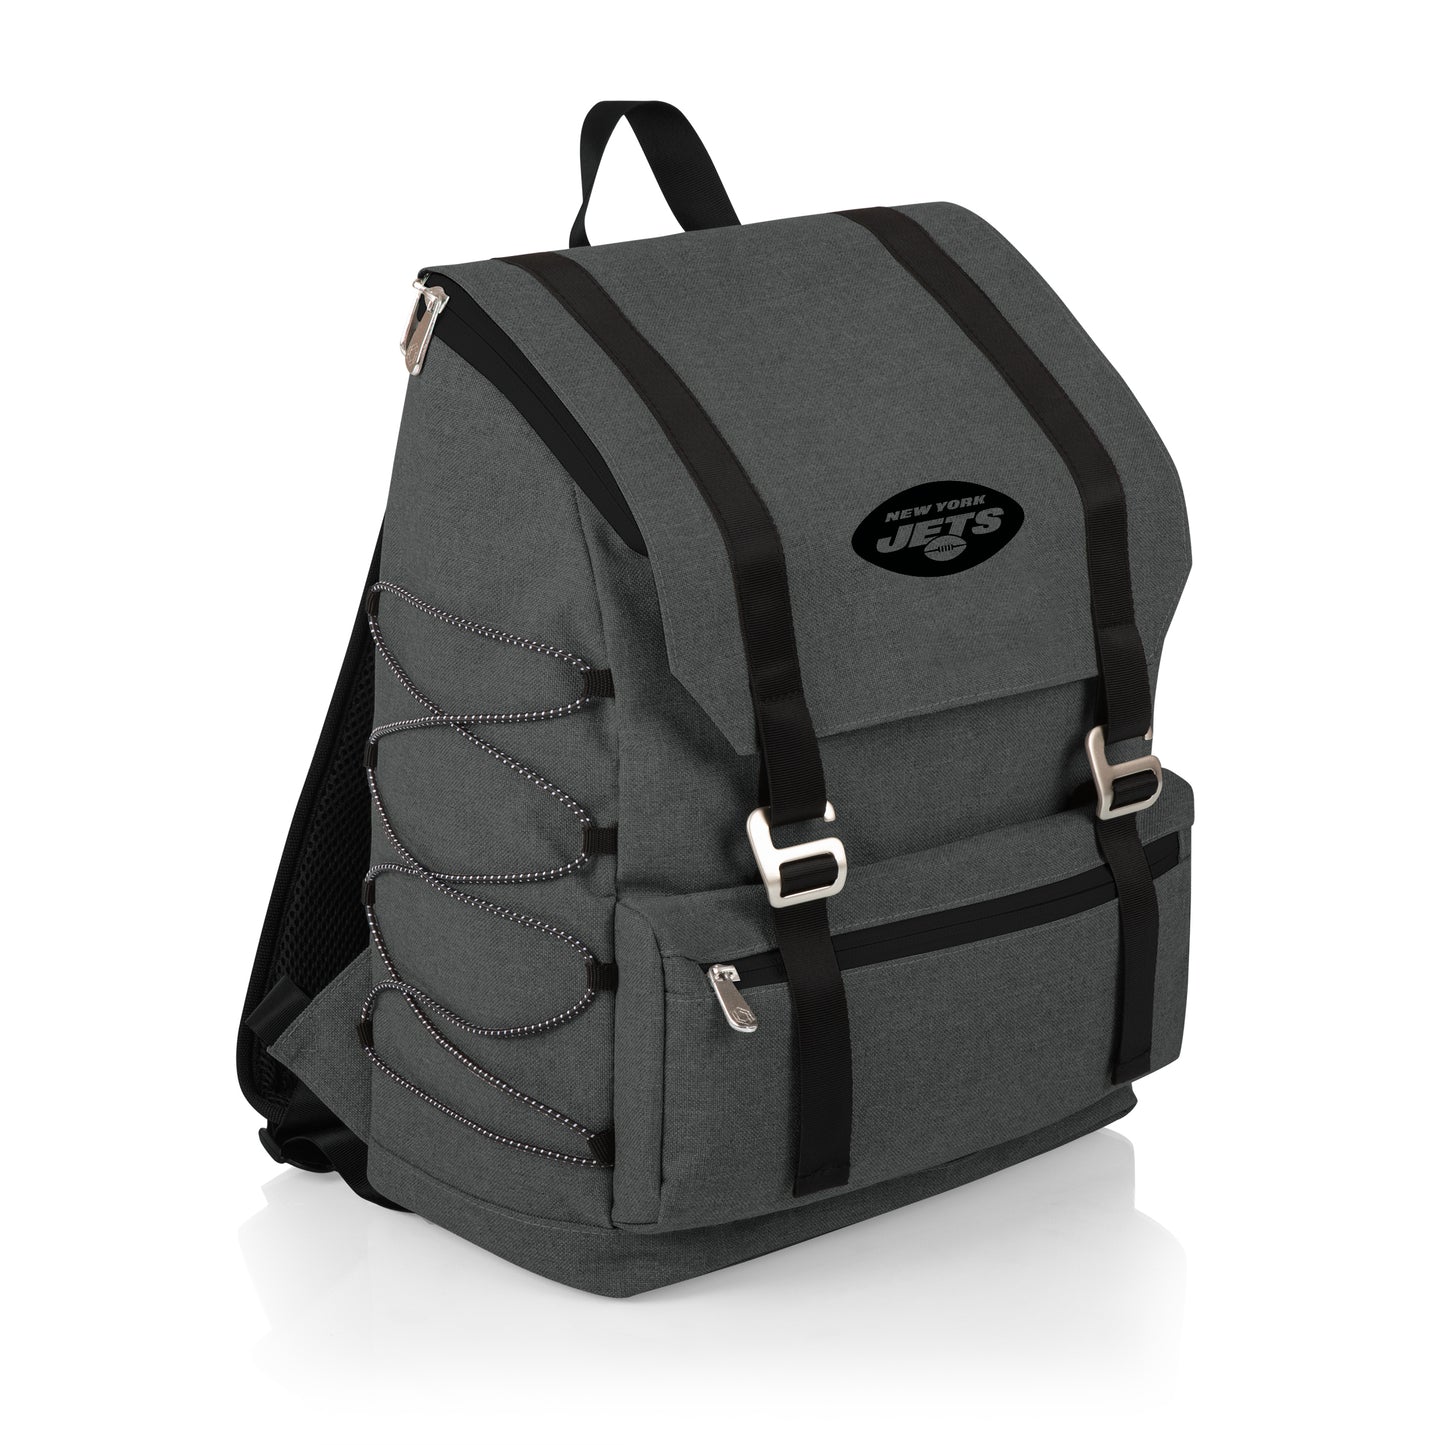 New York Jets - On The Go Traverse Cooler Backpack